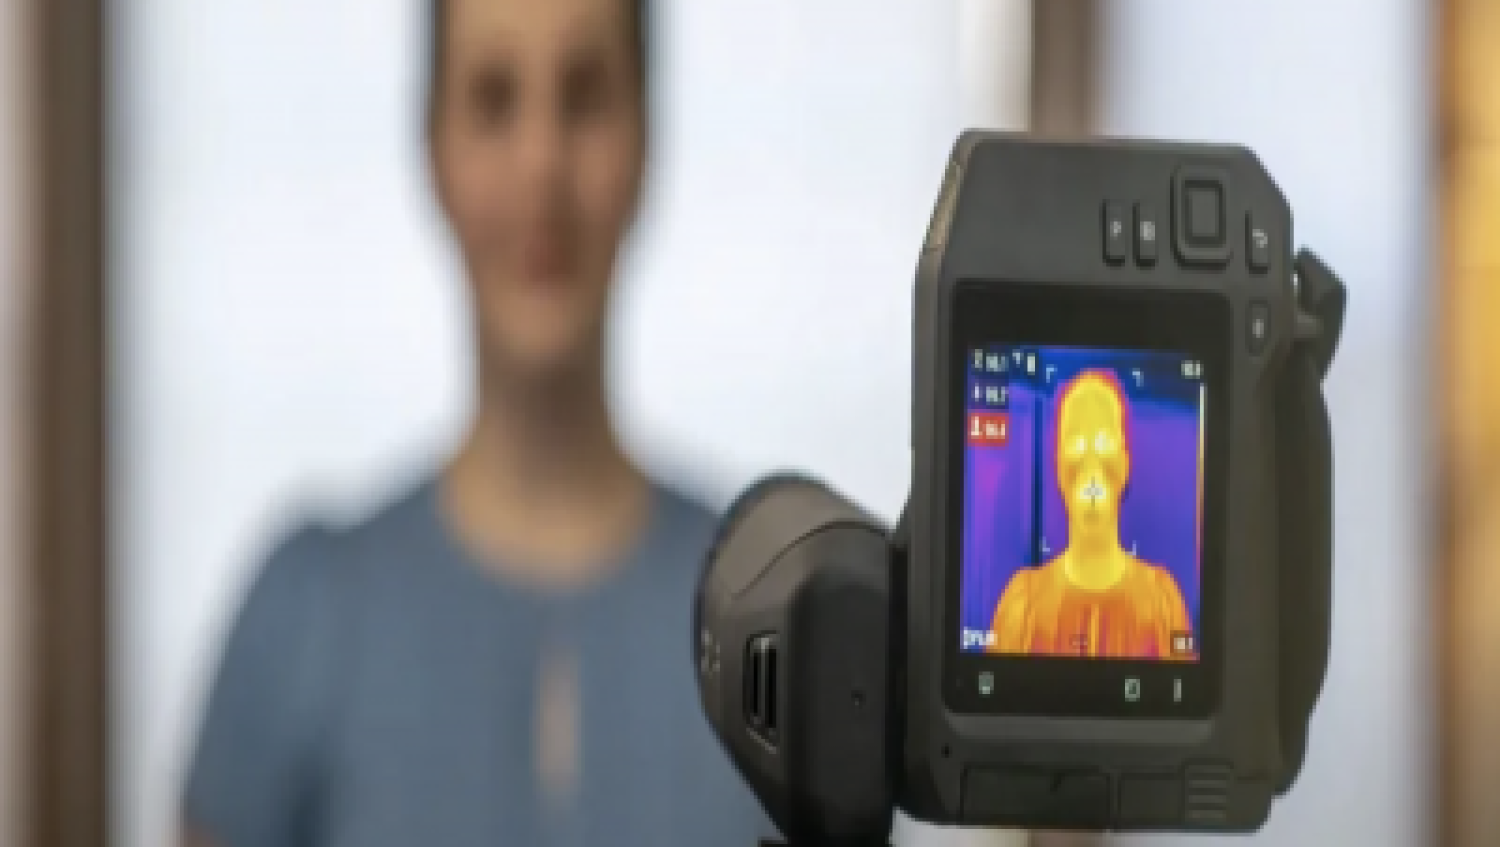 Device visually scanning person's body temperature